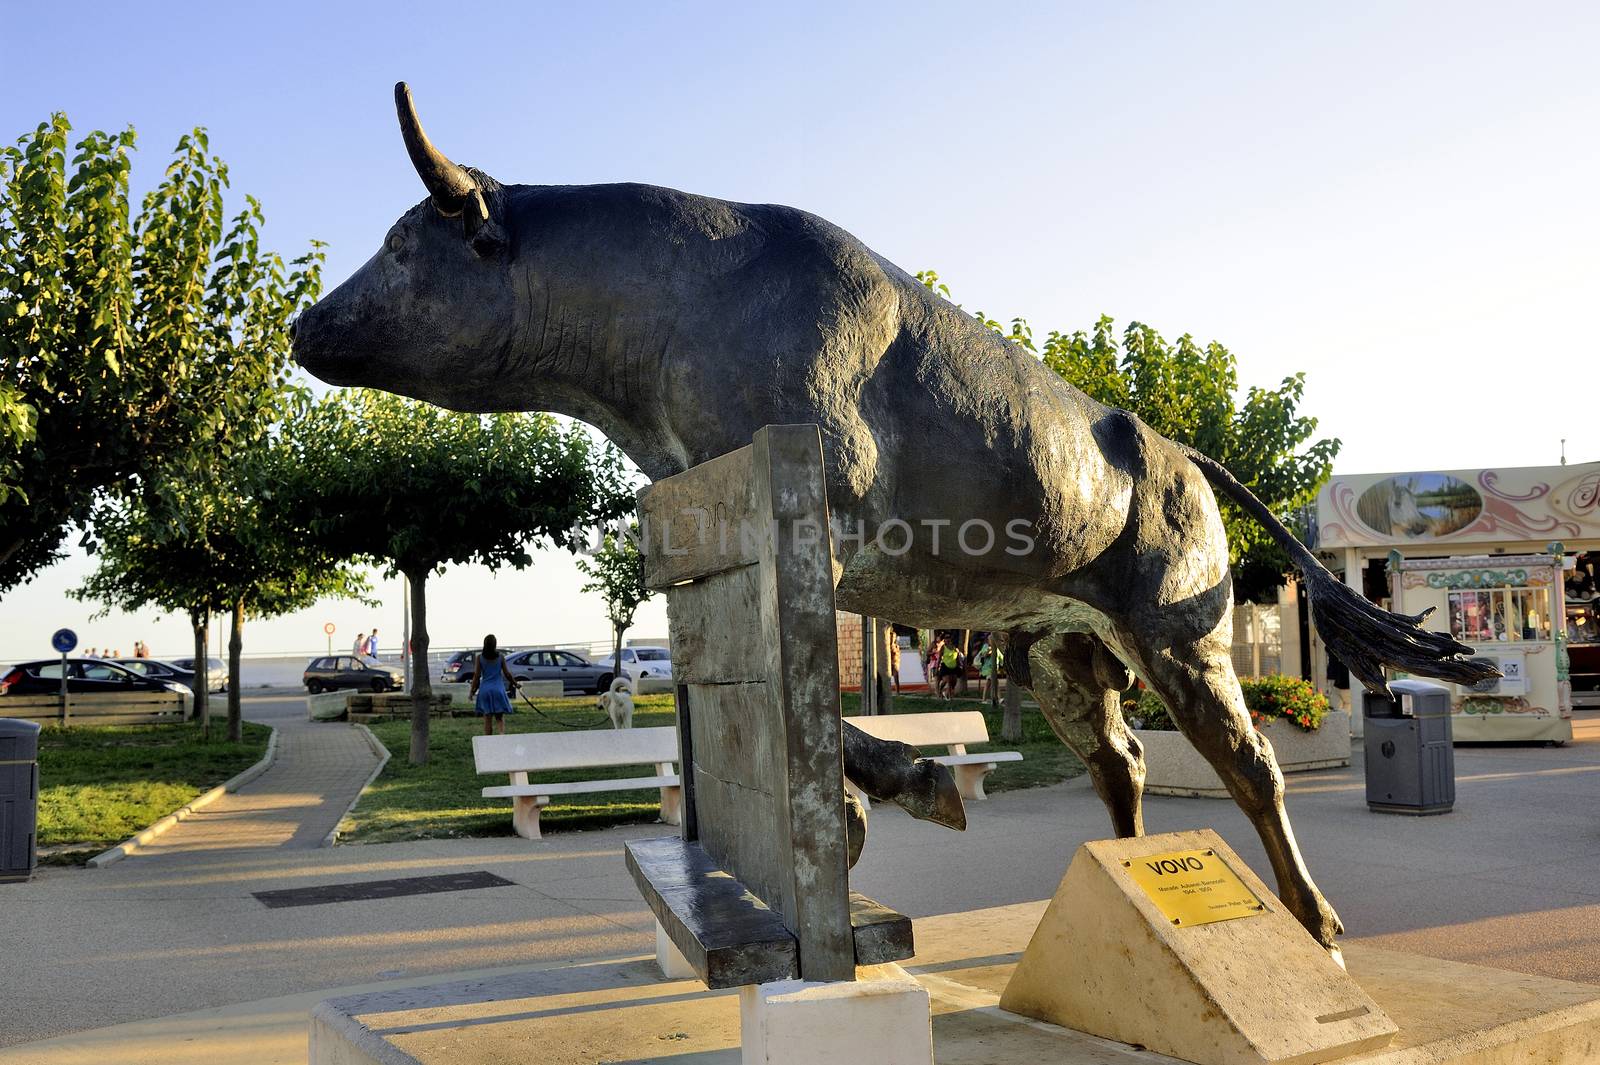 Vovo bull sculpture in the town of Saintes-Married-de-la-Mer in the Camargue center